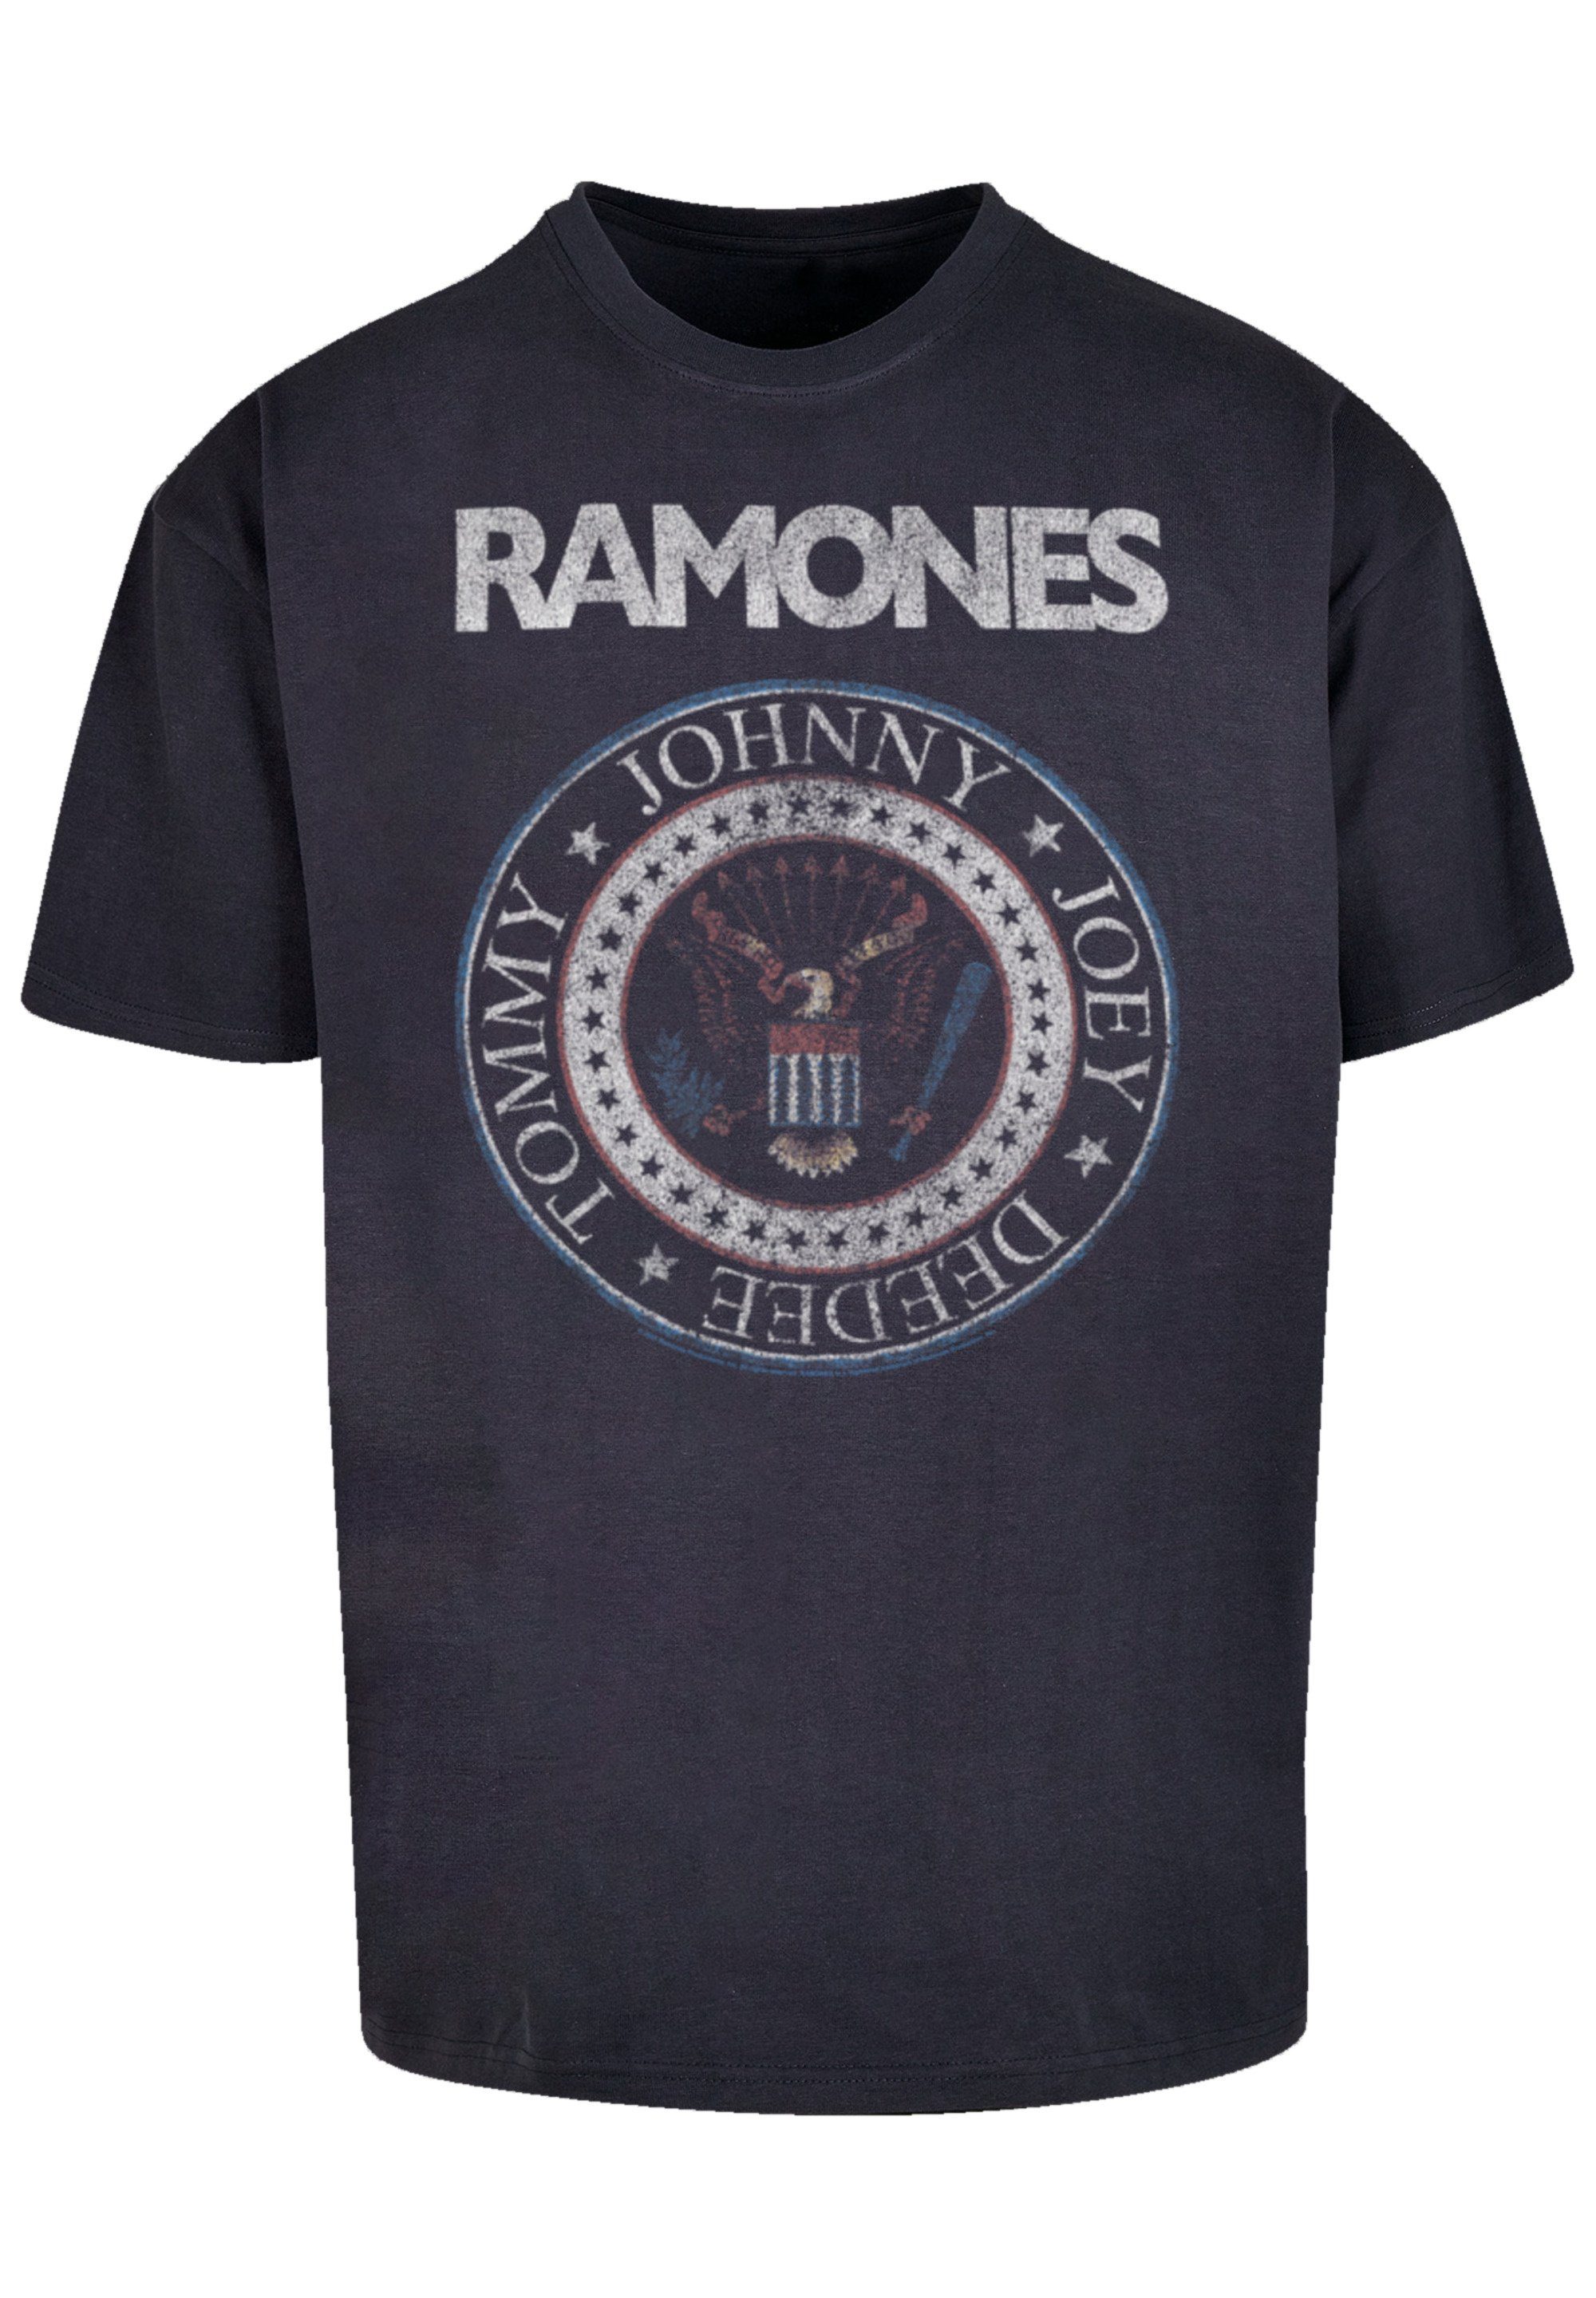 Red navy Ramones Qualität, White F4NT4STIC Musik Rock-Musik Seal Band, T-Shirt Band Rock Premium And